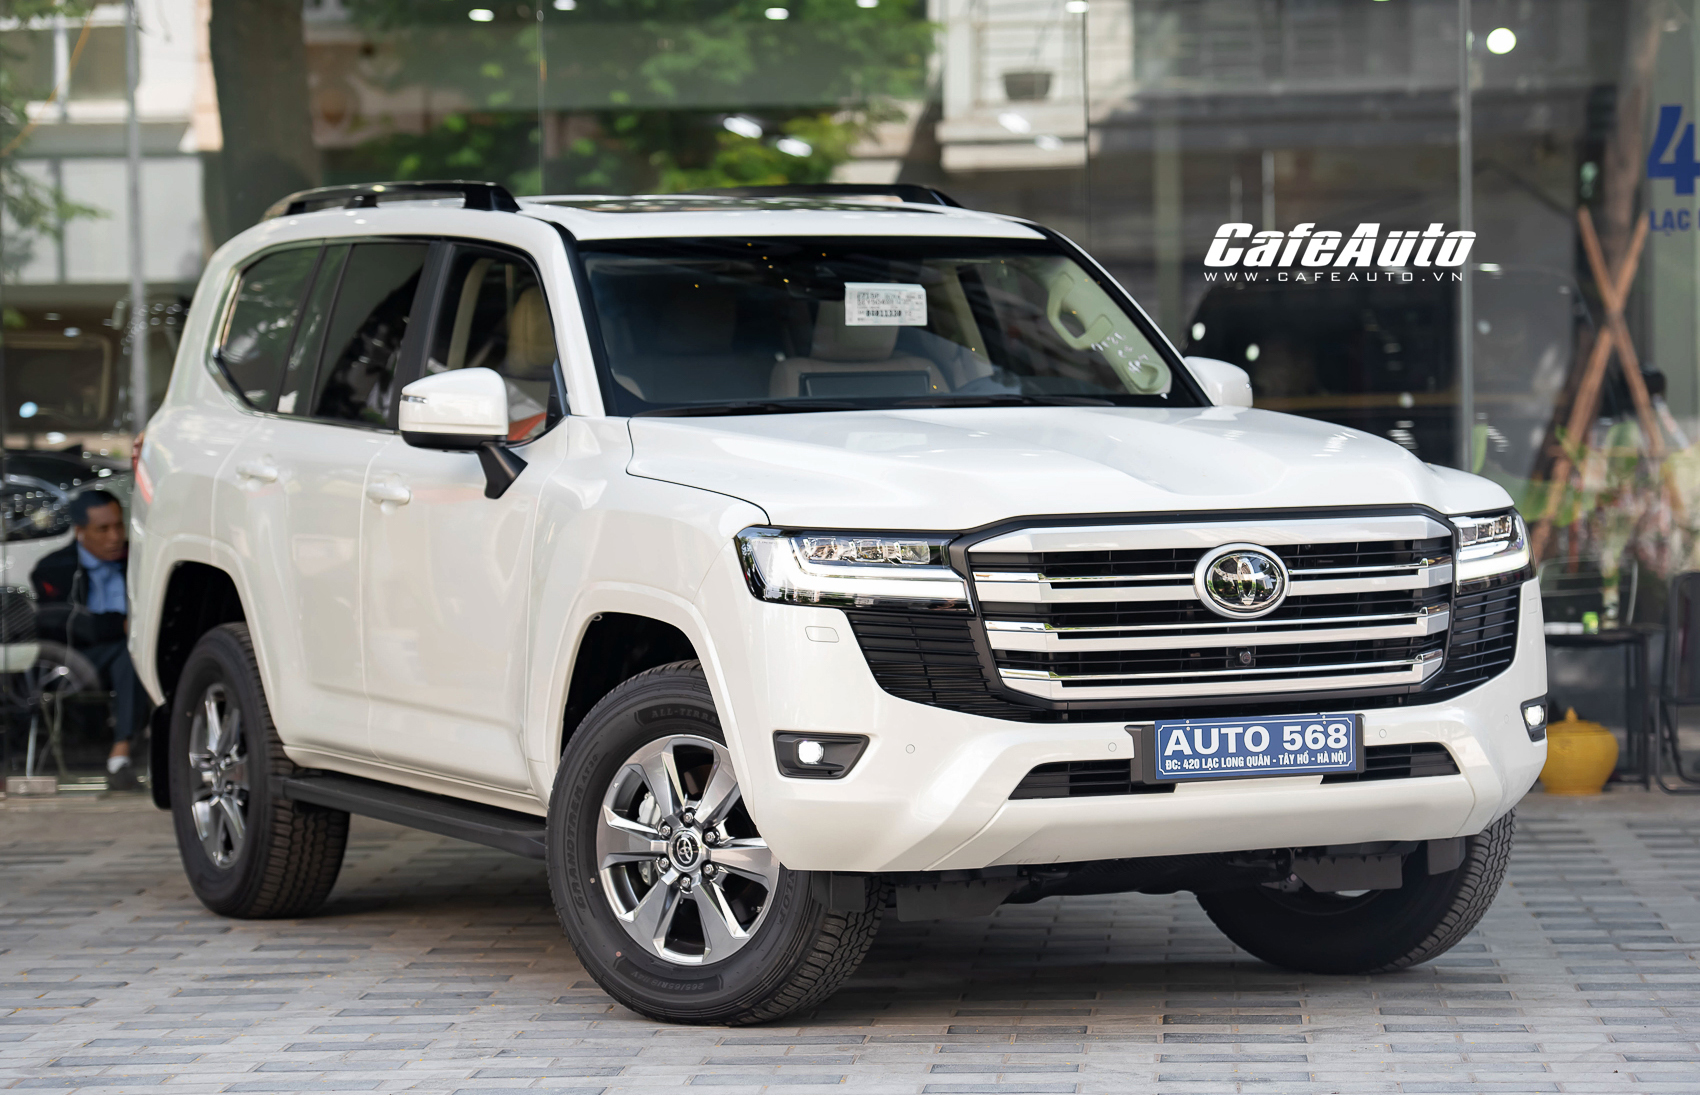 toyota-land-cruiser-2022-do-trung-dong-cafeautovn-14